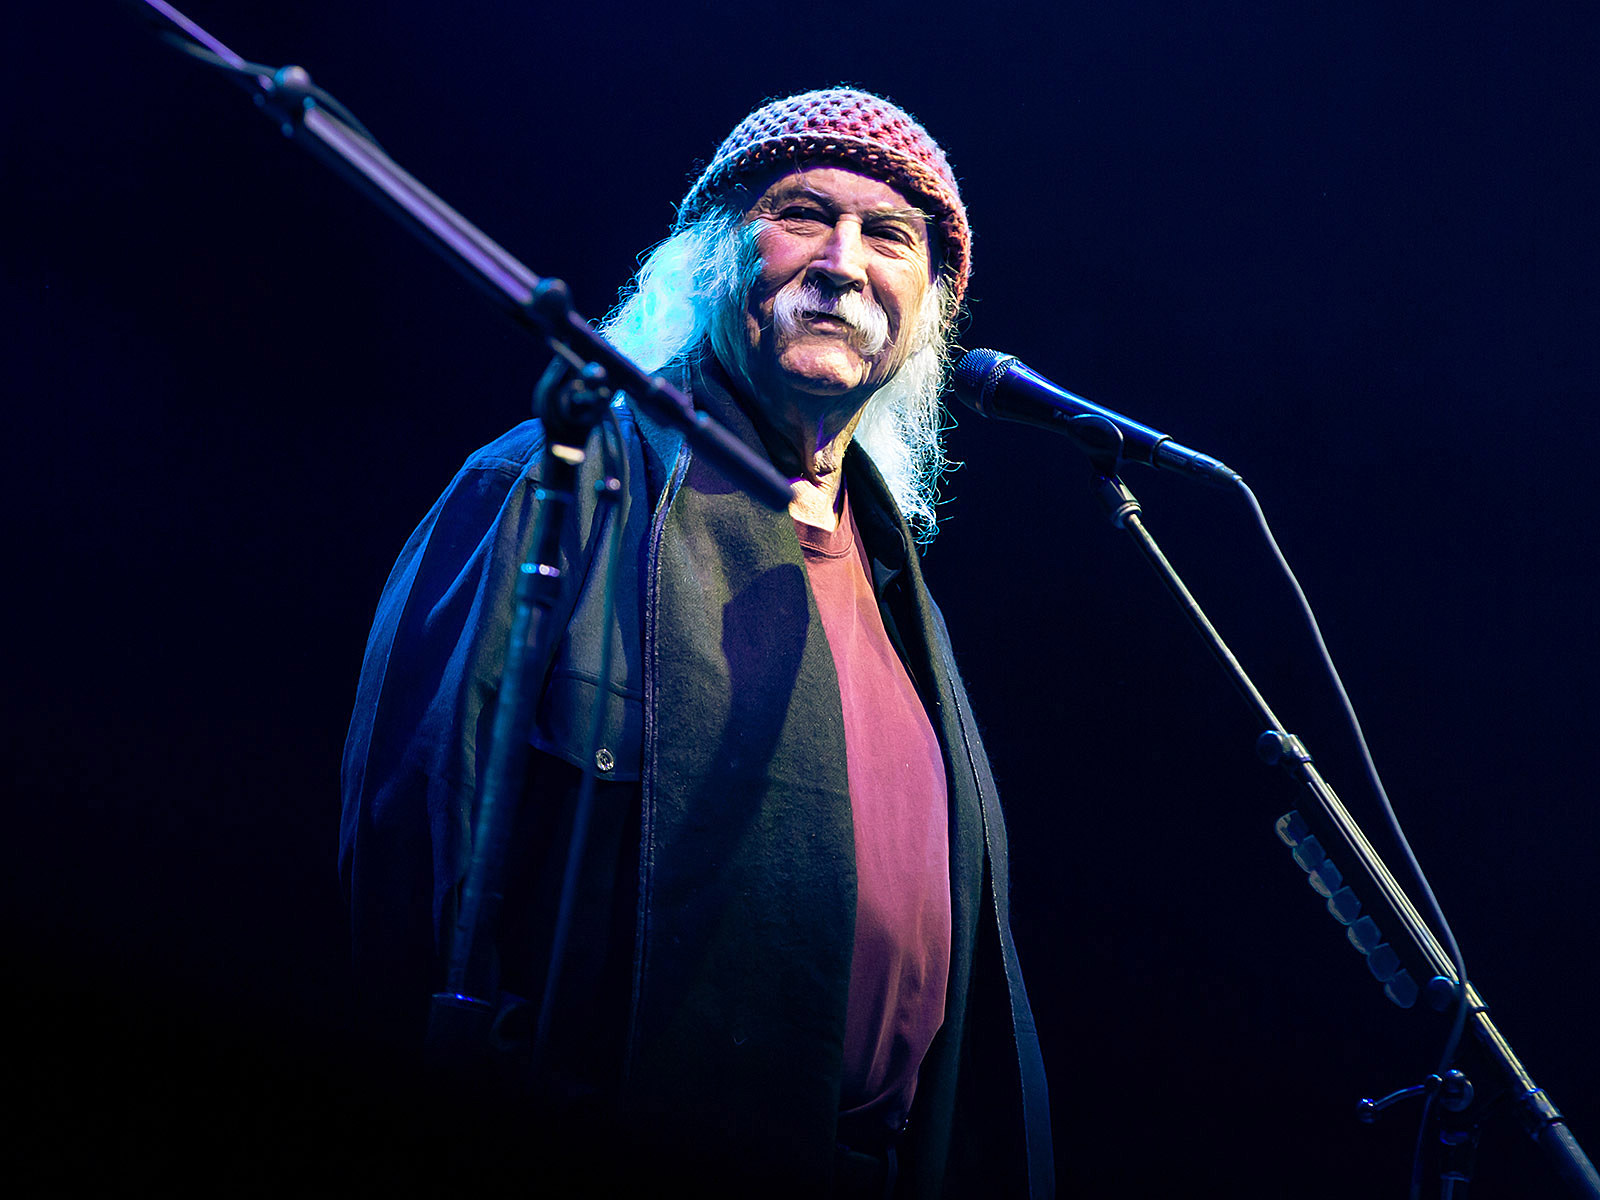 David Crosby wrapped up tour at the Cap (pics, full set video)